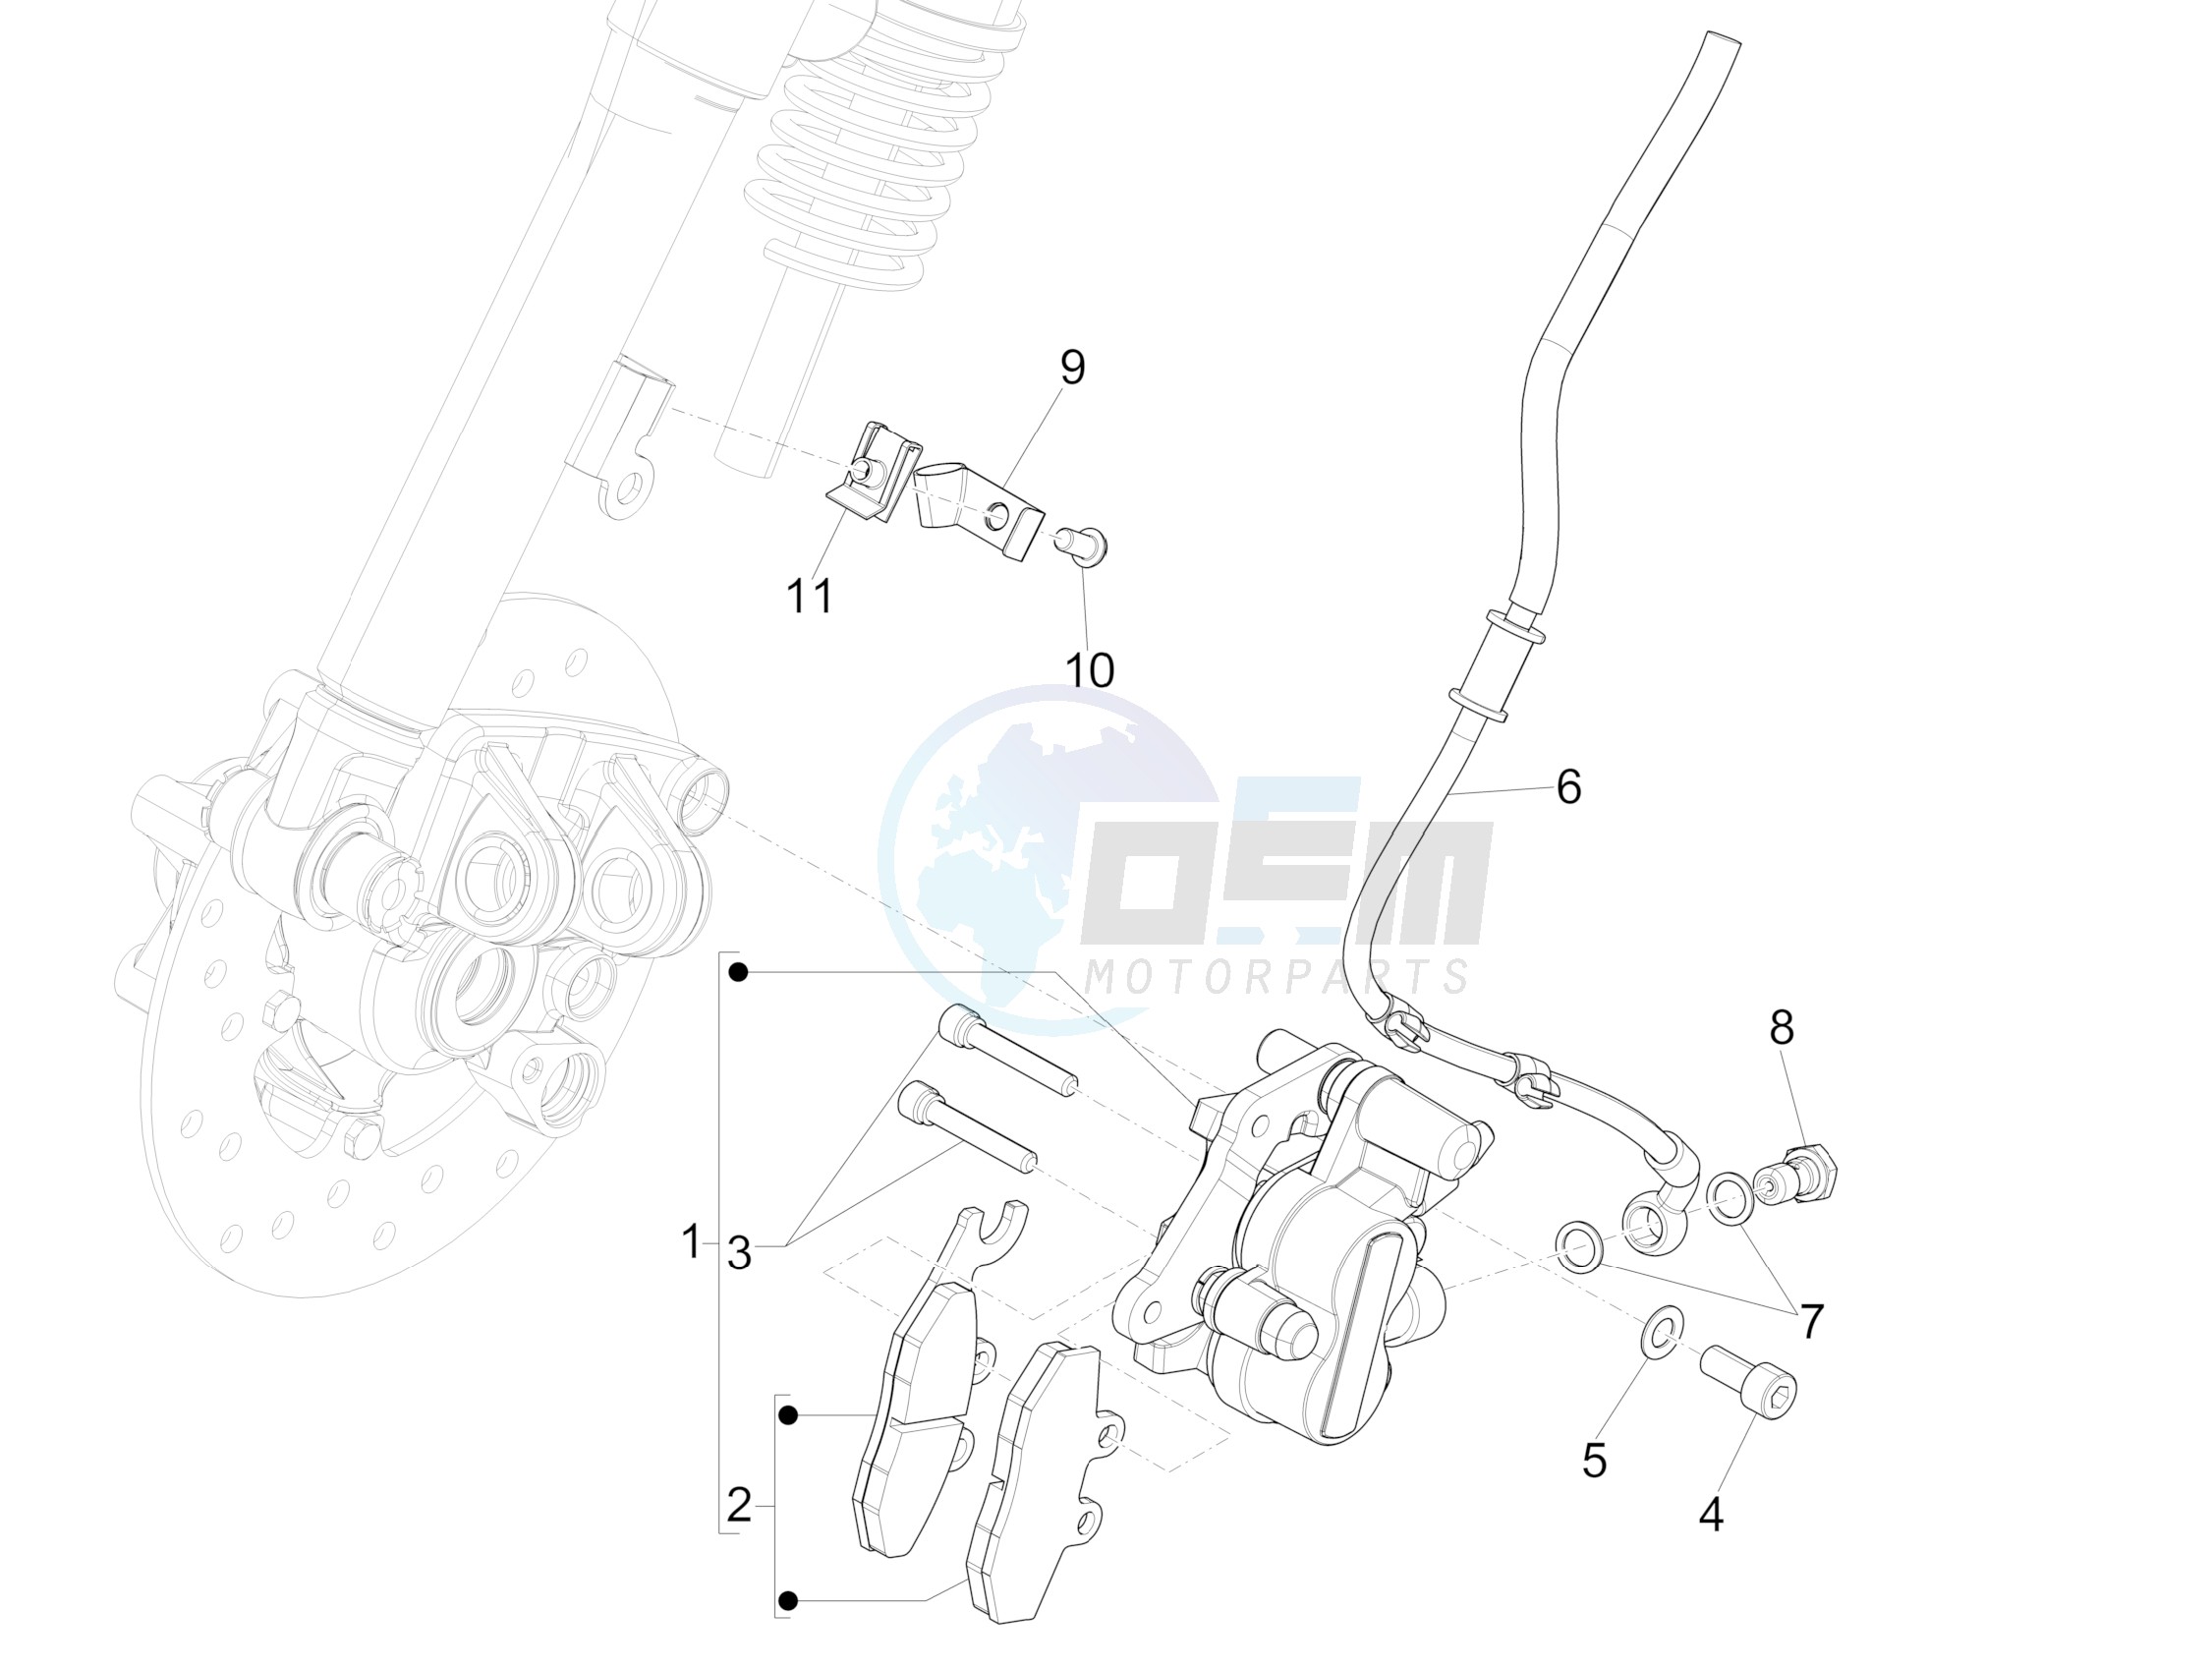 Brakes pipes - Calipers image